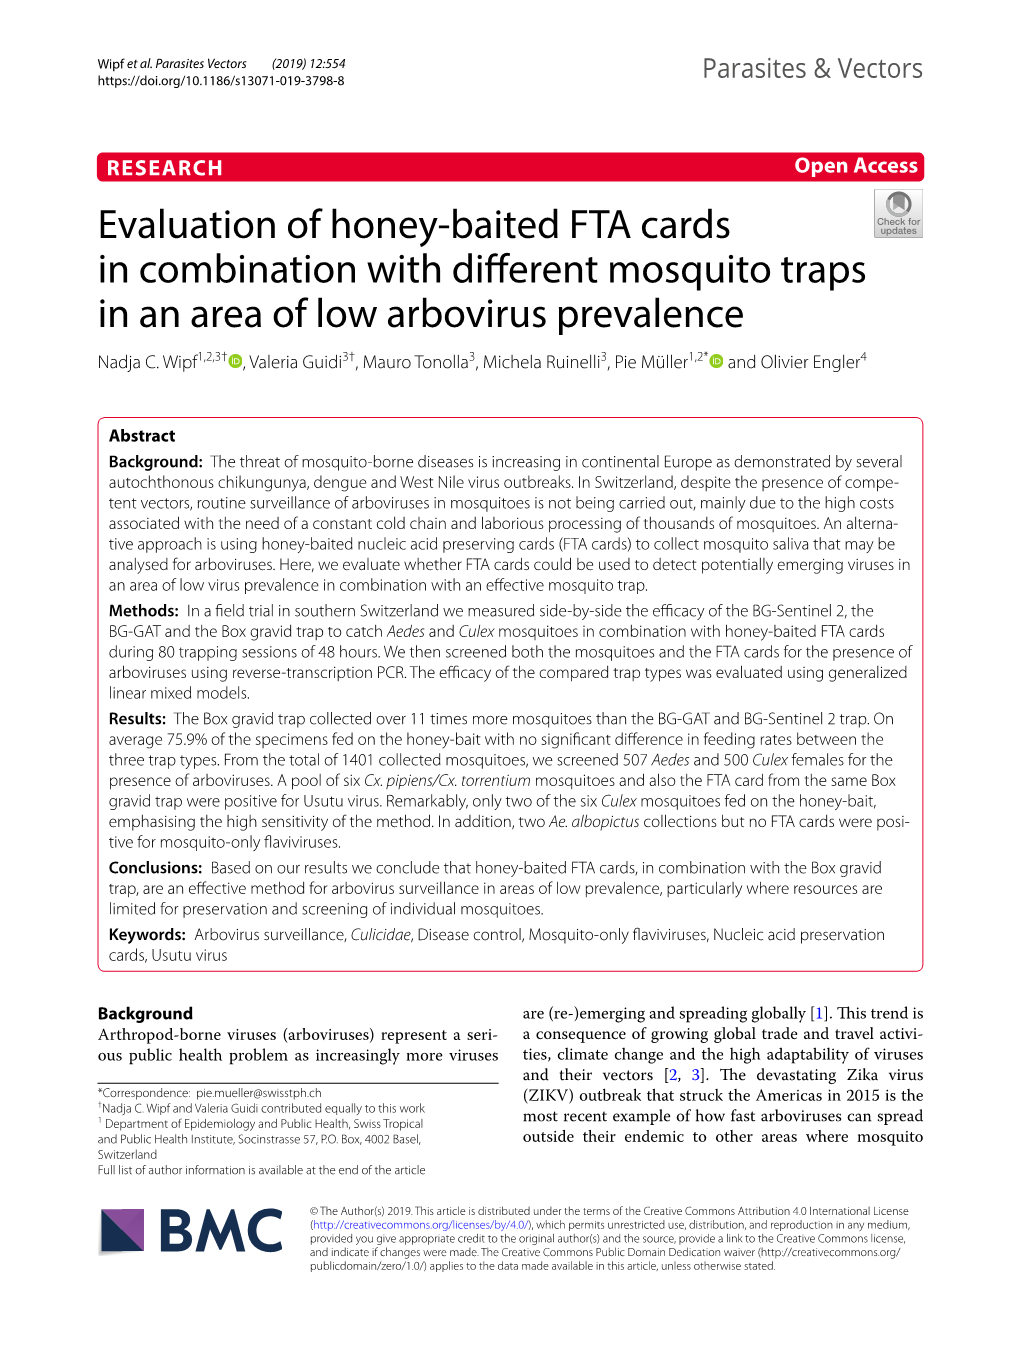 Evaluation of Honey-Baited FTA Cards in Combination with Different